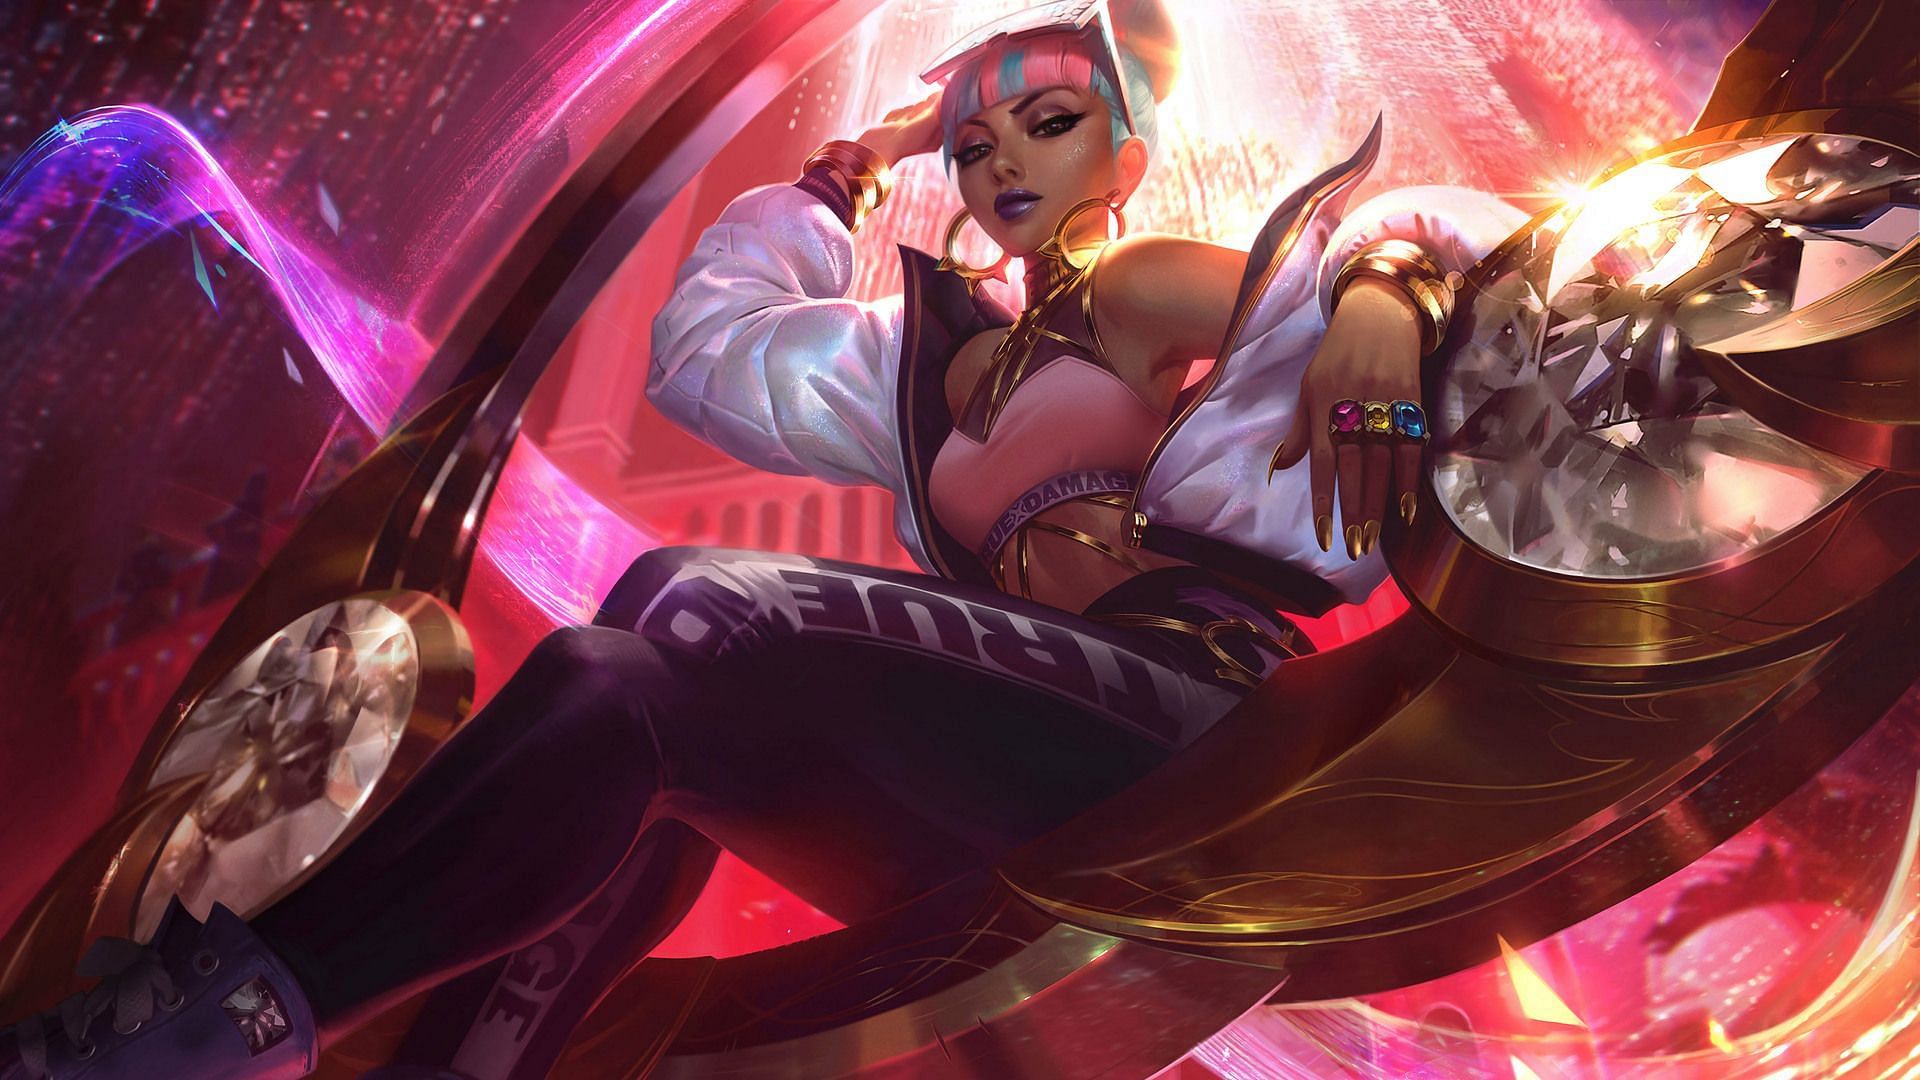 Qiyana has maintained her position despite receiving nerfs (Image via League of Legends)